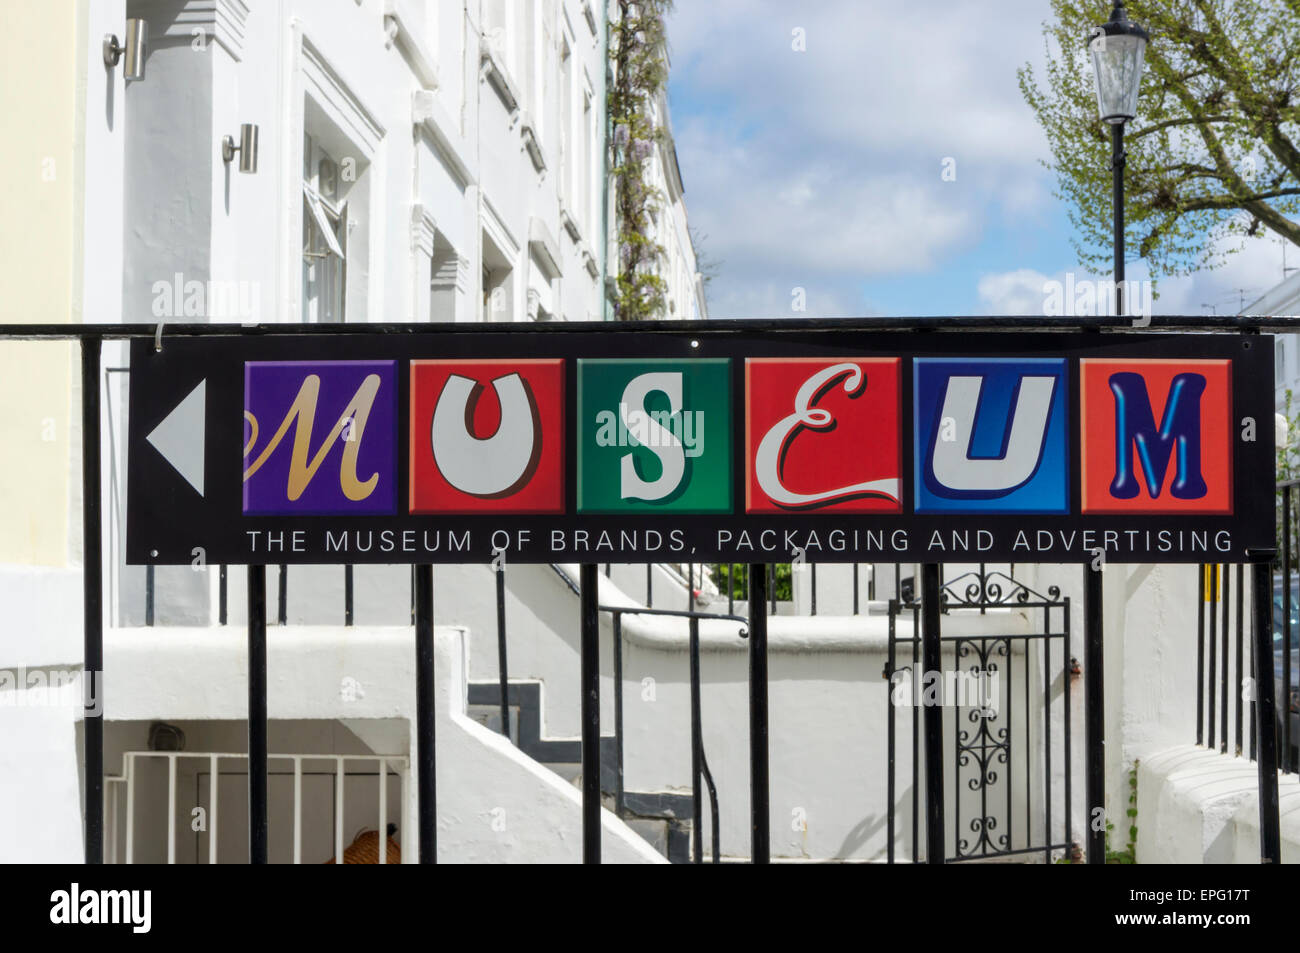 A sign for the Museum of Brands, Packaging and Advertising in Notting Hill, London. Stock Photo